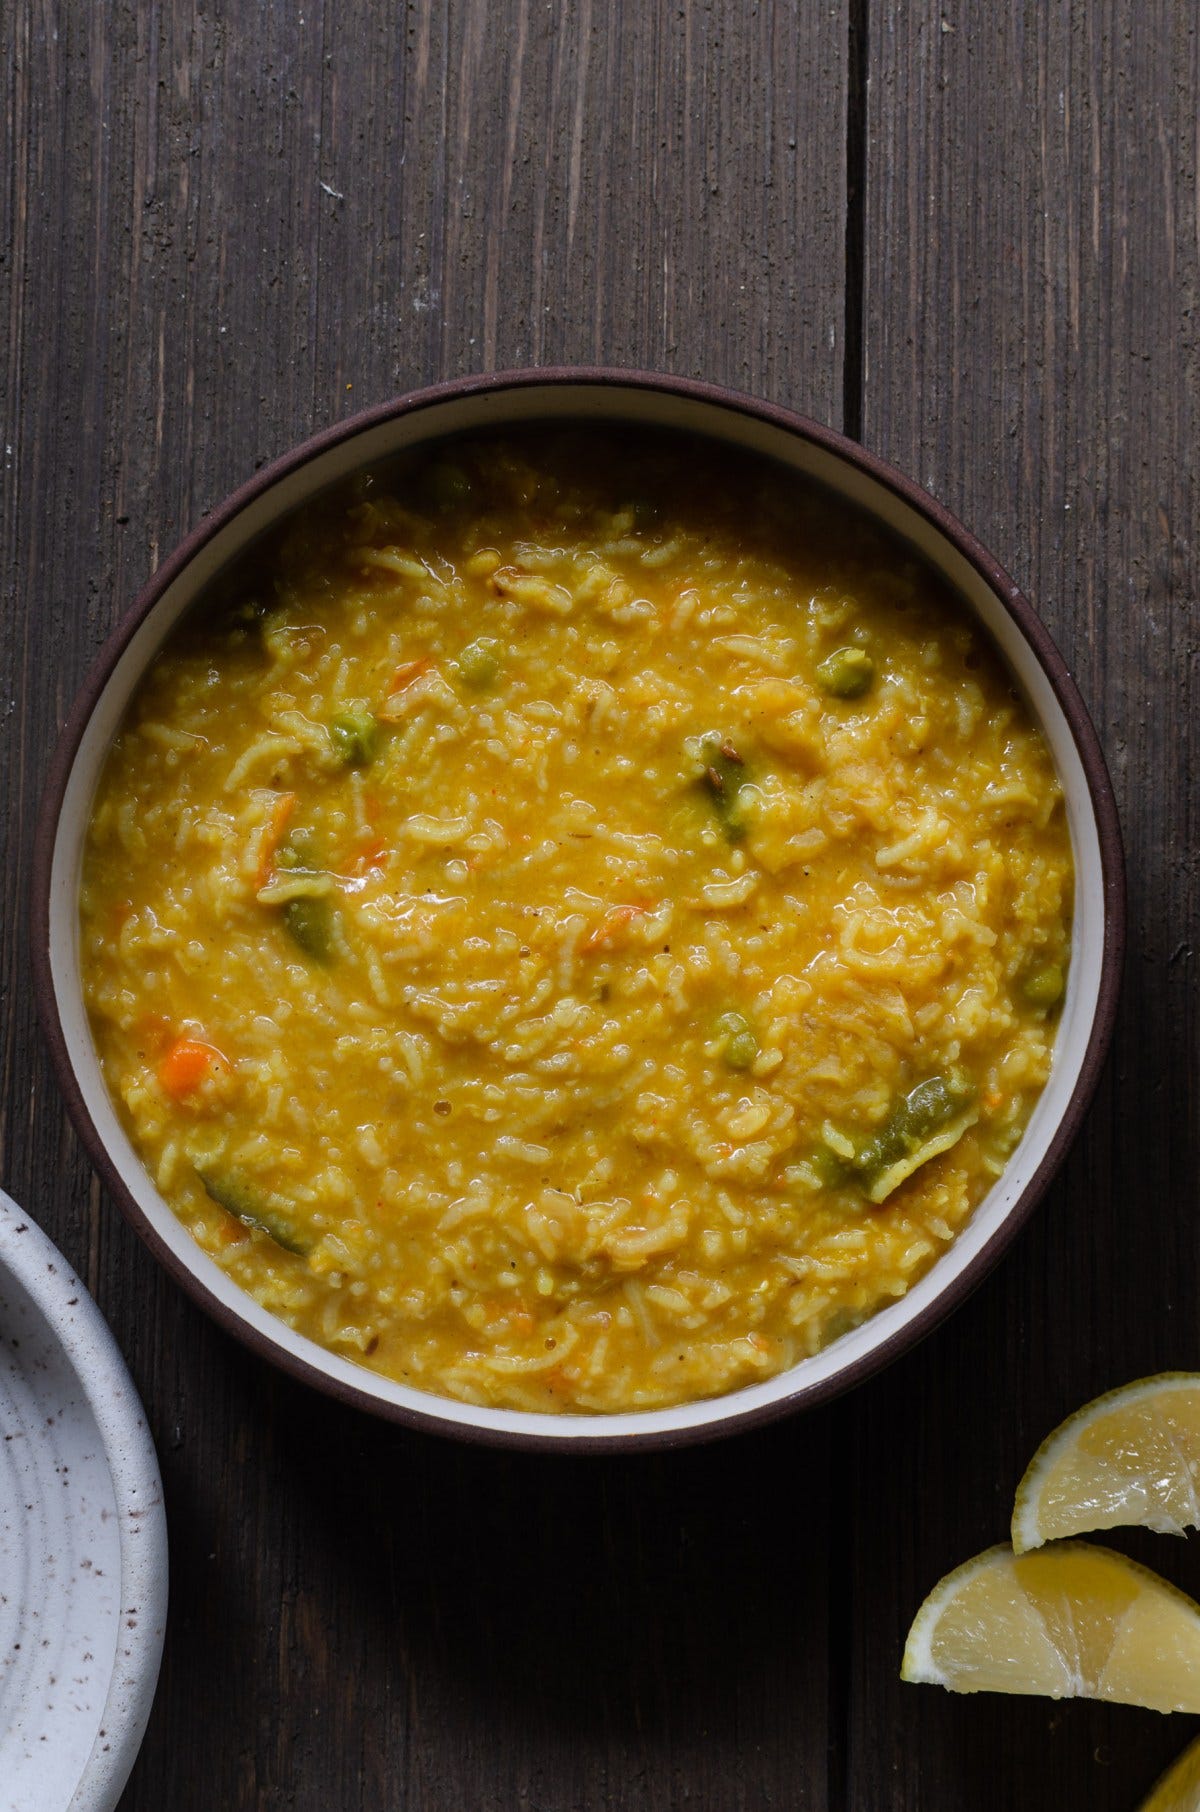 Khichdi is a comforting and nourishing one-pot Indian dish of rice, dal, spices, and vegetables. Simple, healthy, and so cozy.